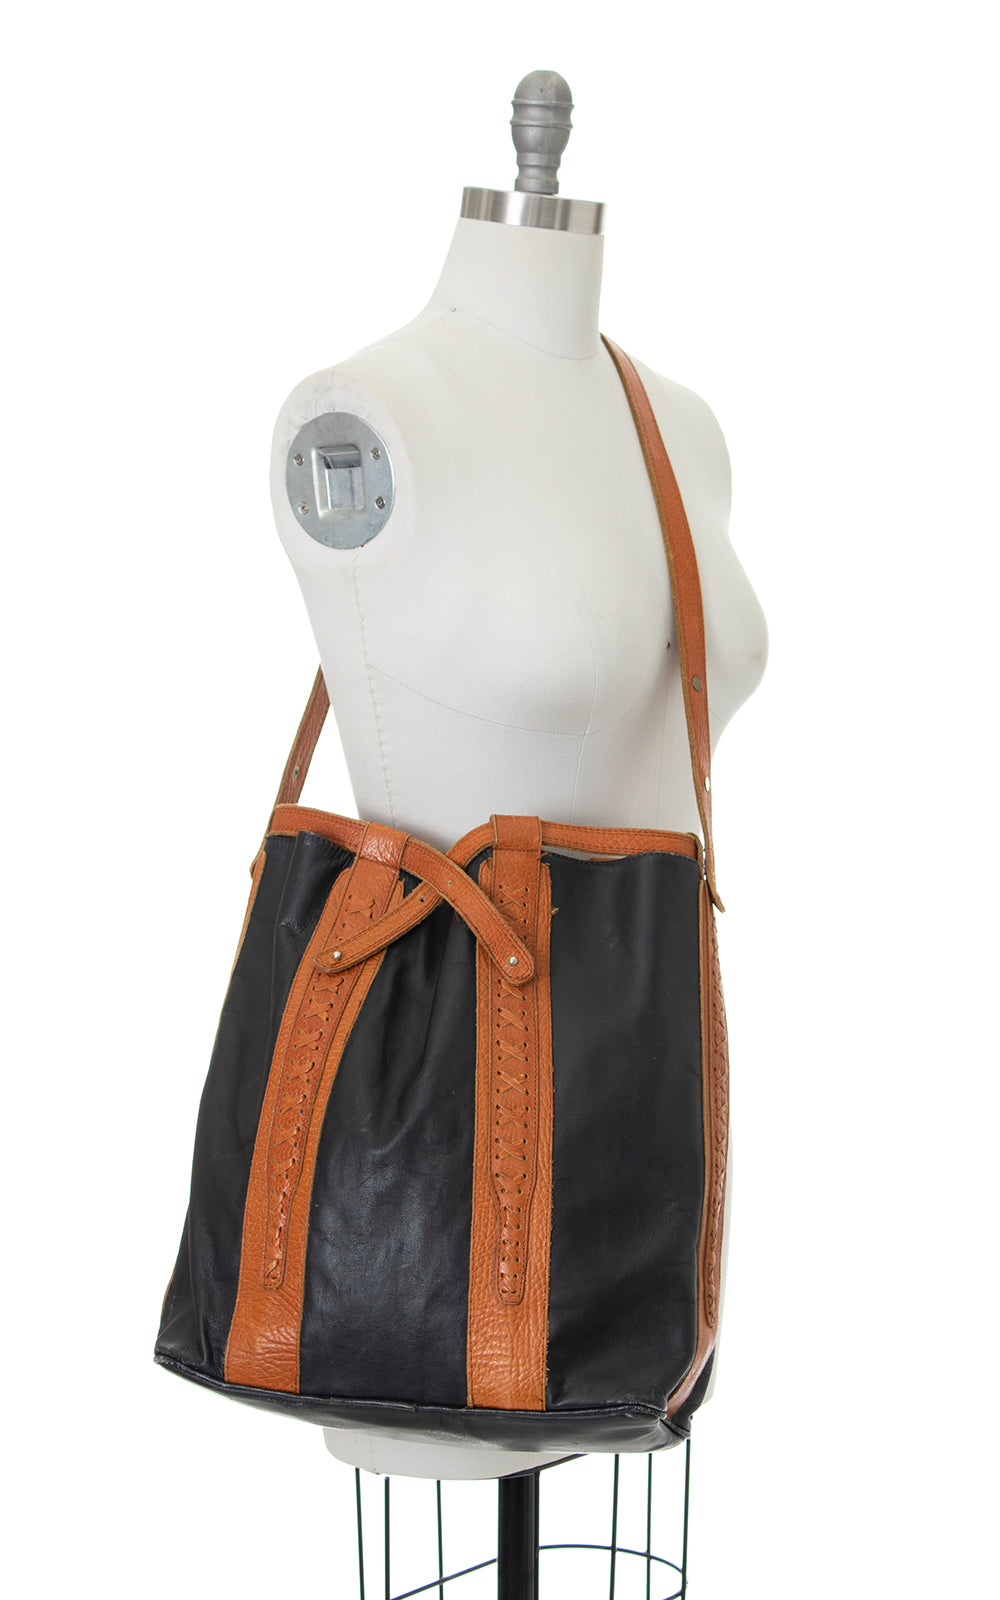 Vintage 1970s 1980s Two-Tone Leather Bucket Bag by Birthday Life Vintage